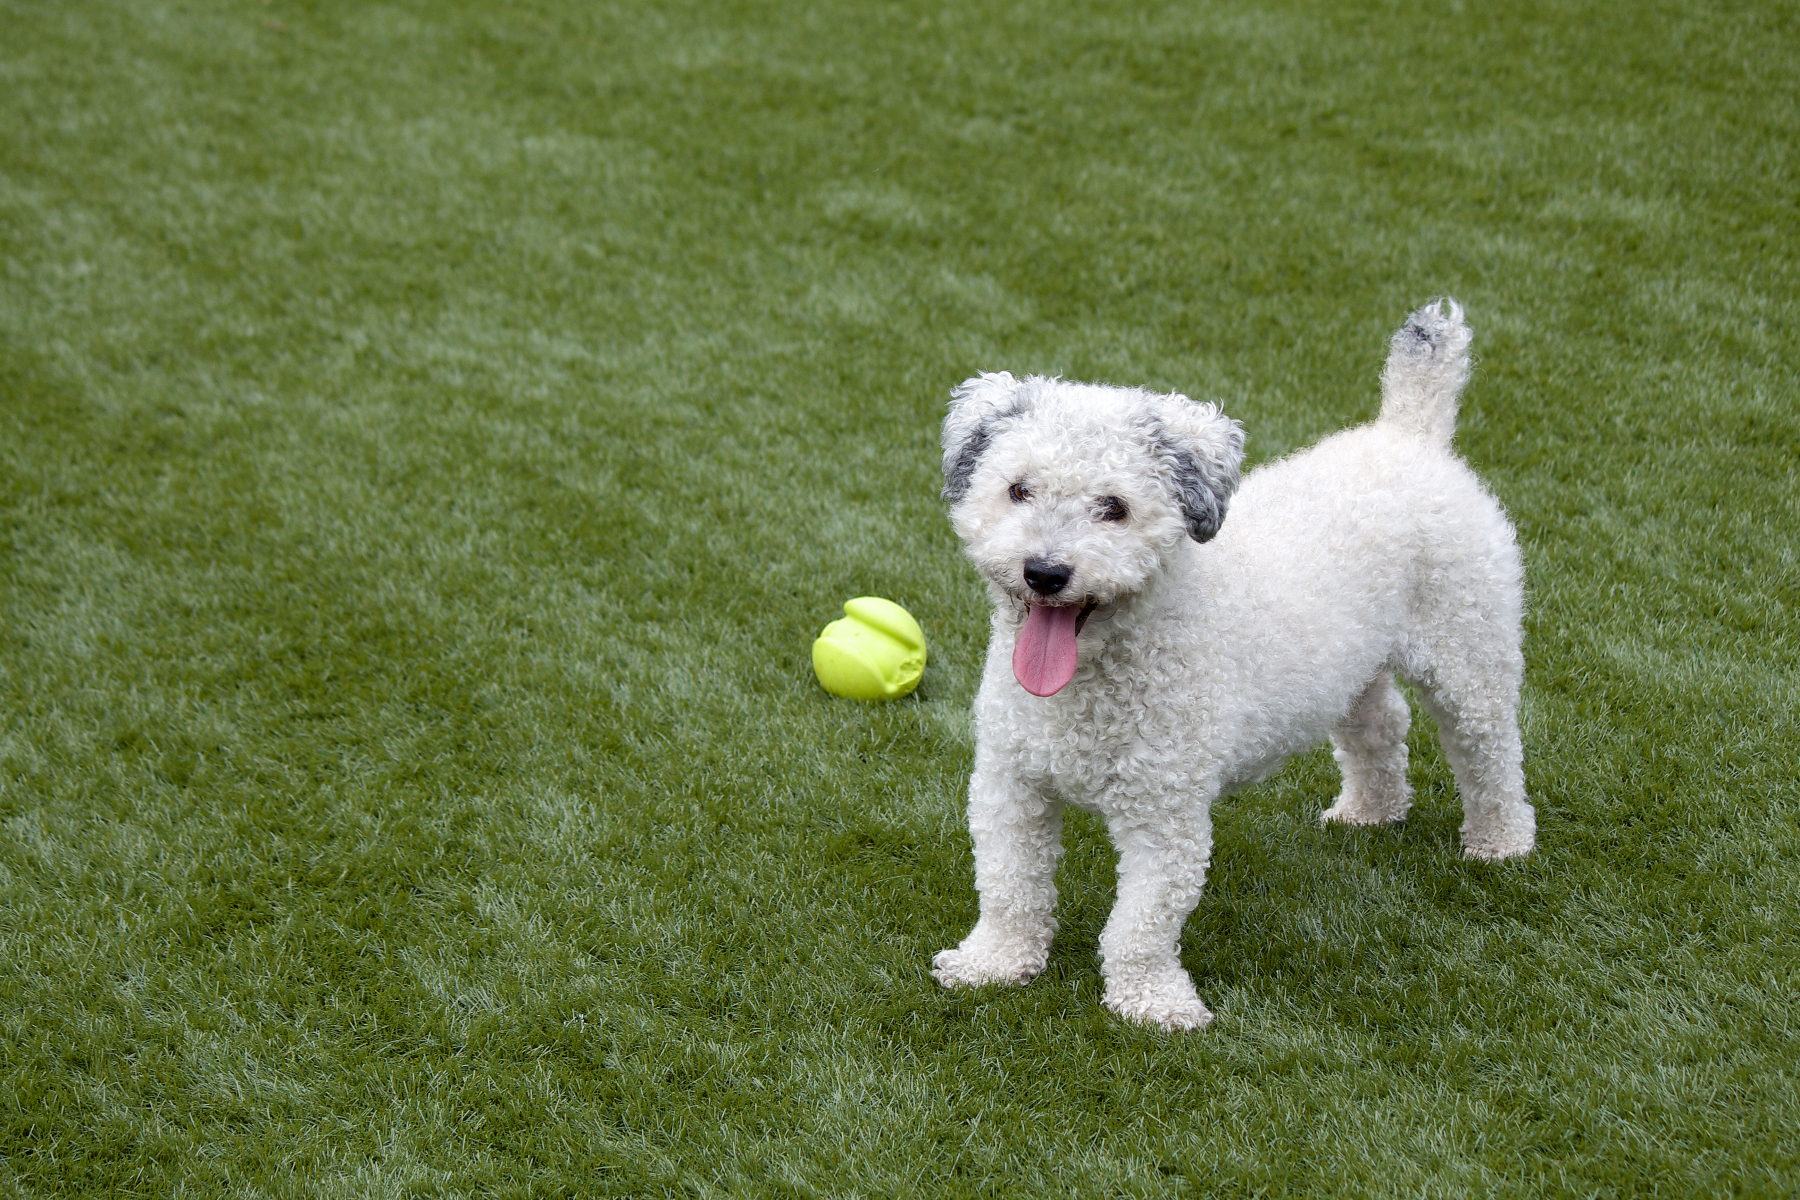 SYNLawn, a manufacturer and installer of synthetic landscape grass, shows an example, for residential use, of a dog playing with a tennis ball in British Colombia, Canada.